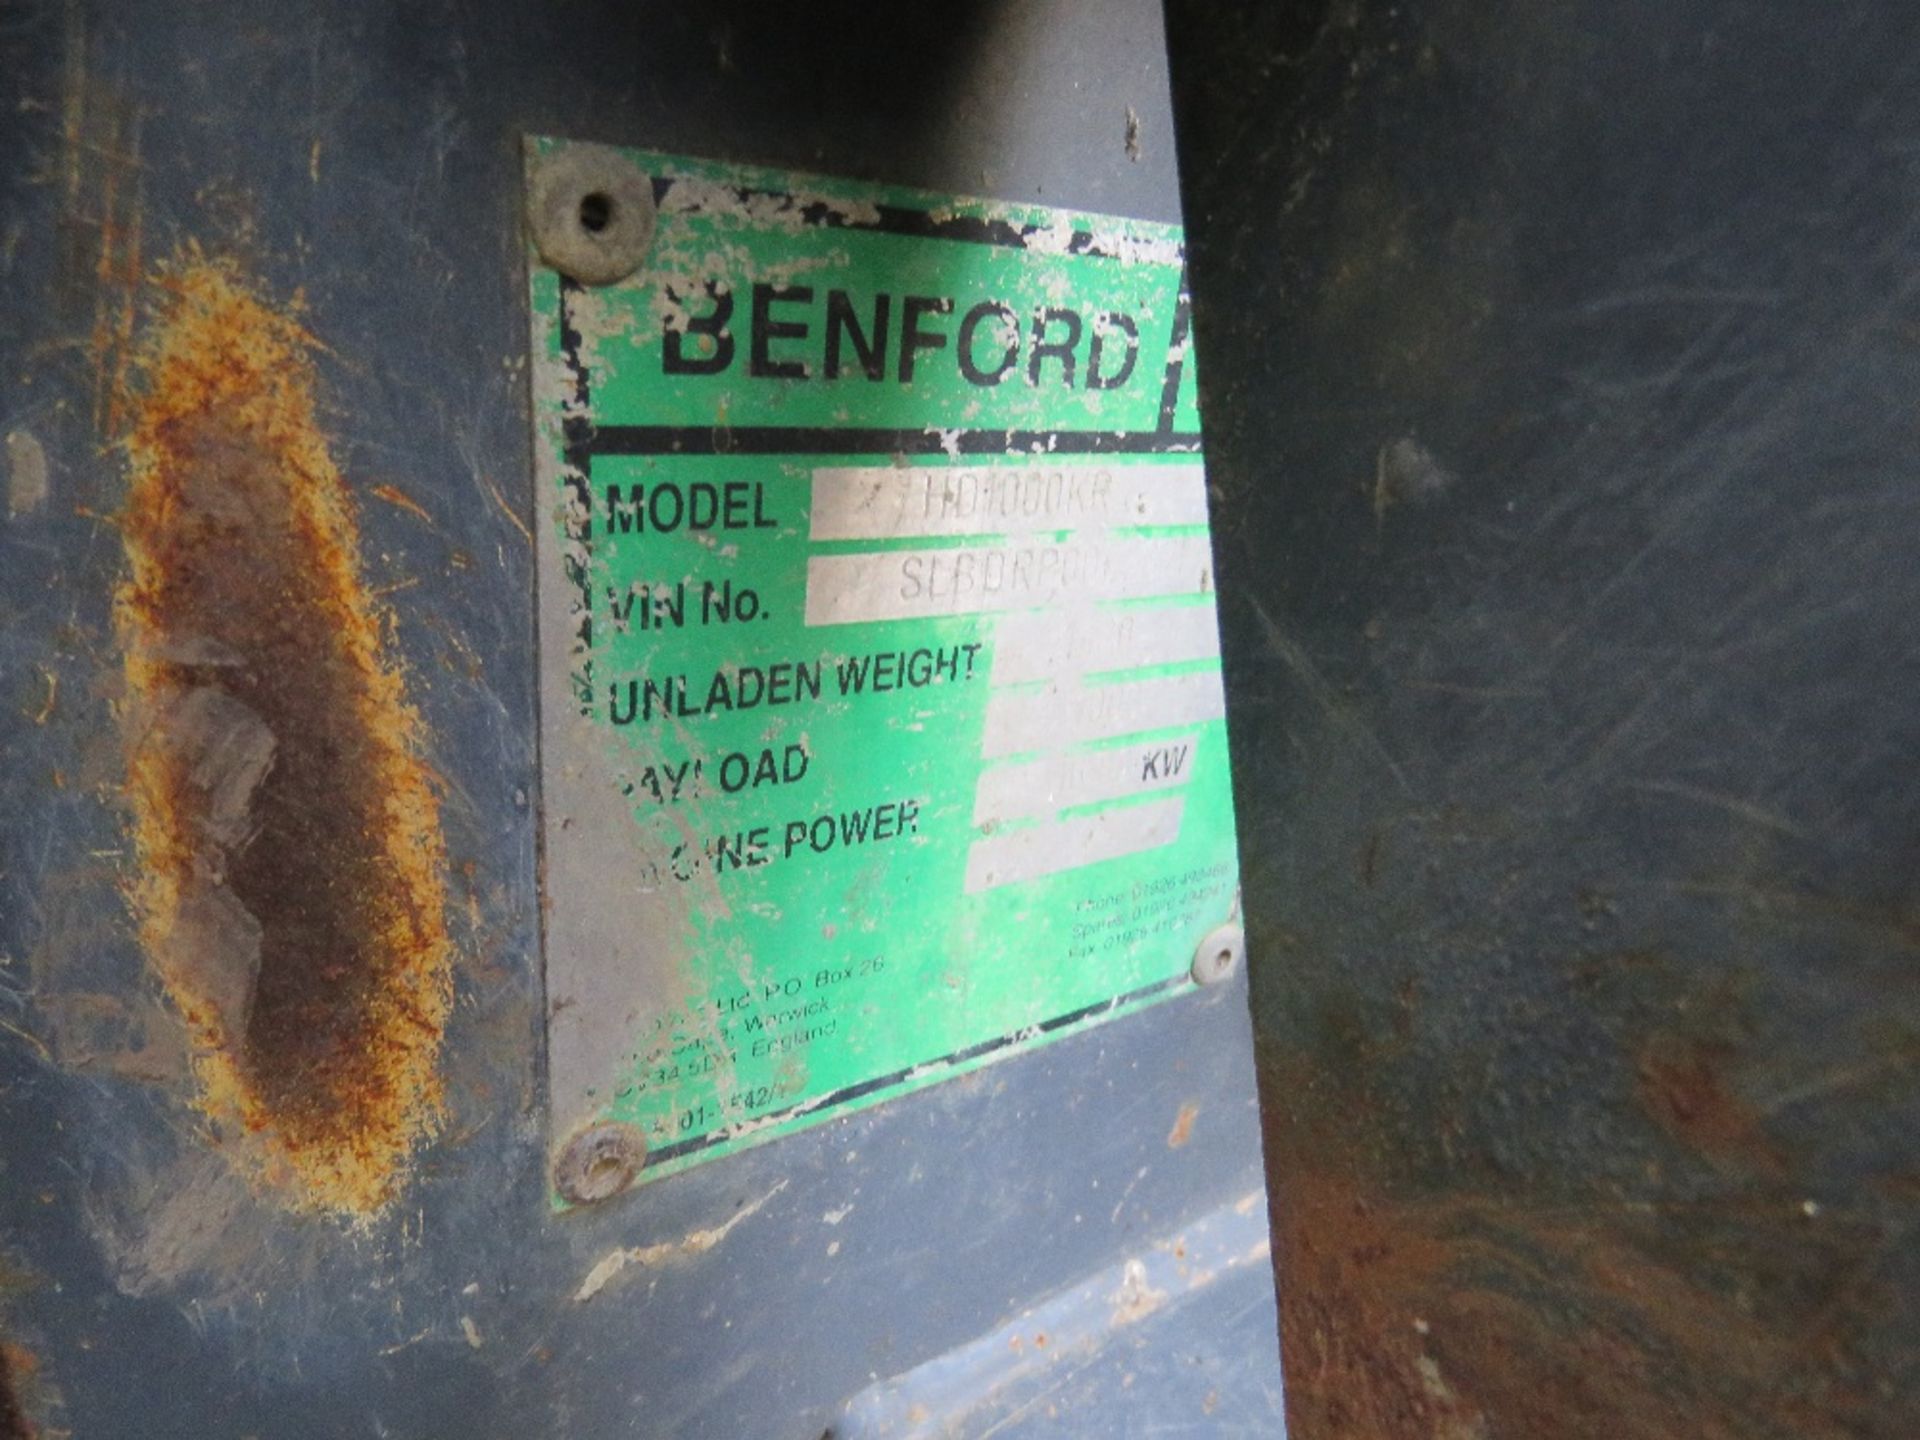 BENFORD TEREX HD1000 HIGH TIP DUMPER. SN:SLBDRP00L207HM265. DRIVES AND TIPS..SWITCH FAULT ON HIGH TI - Image 8 of 9